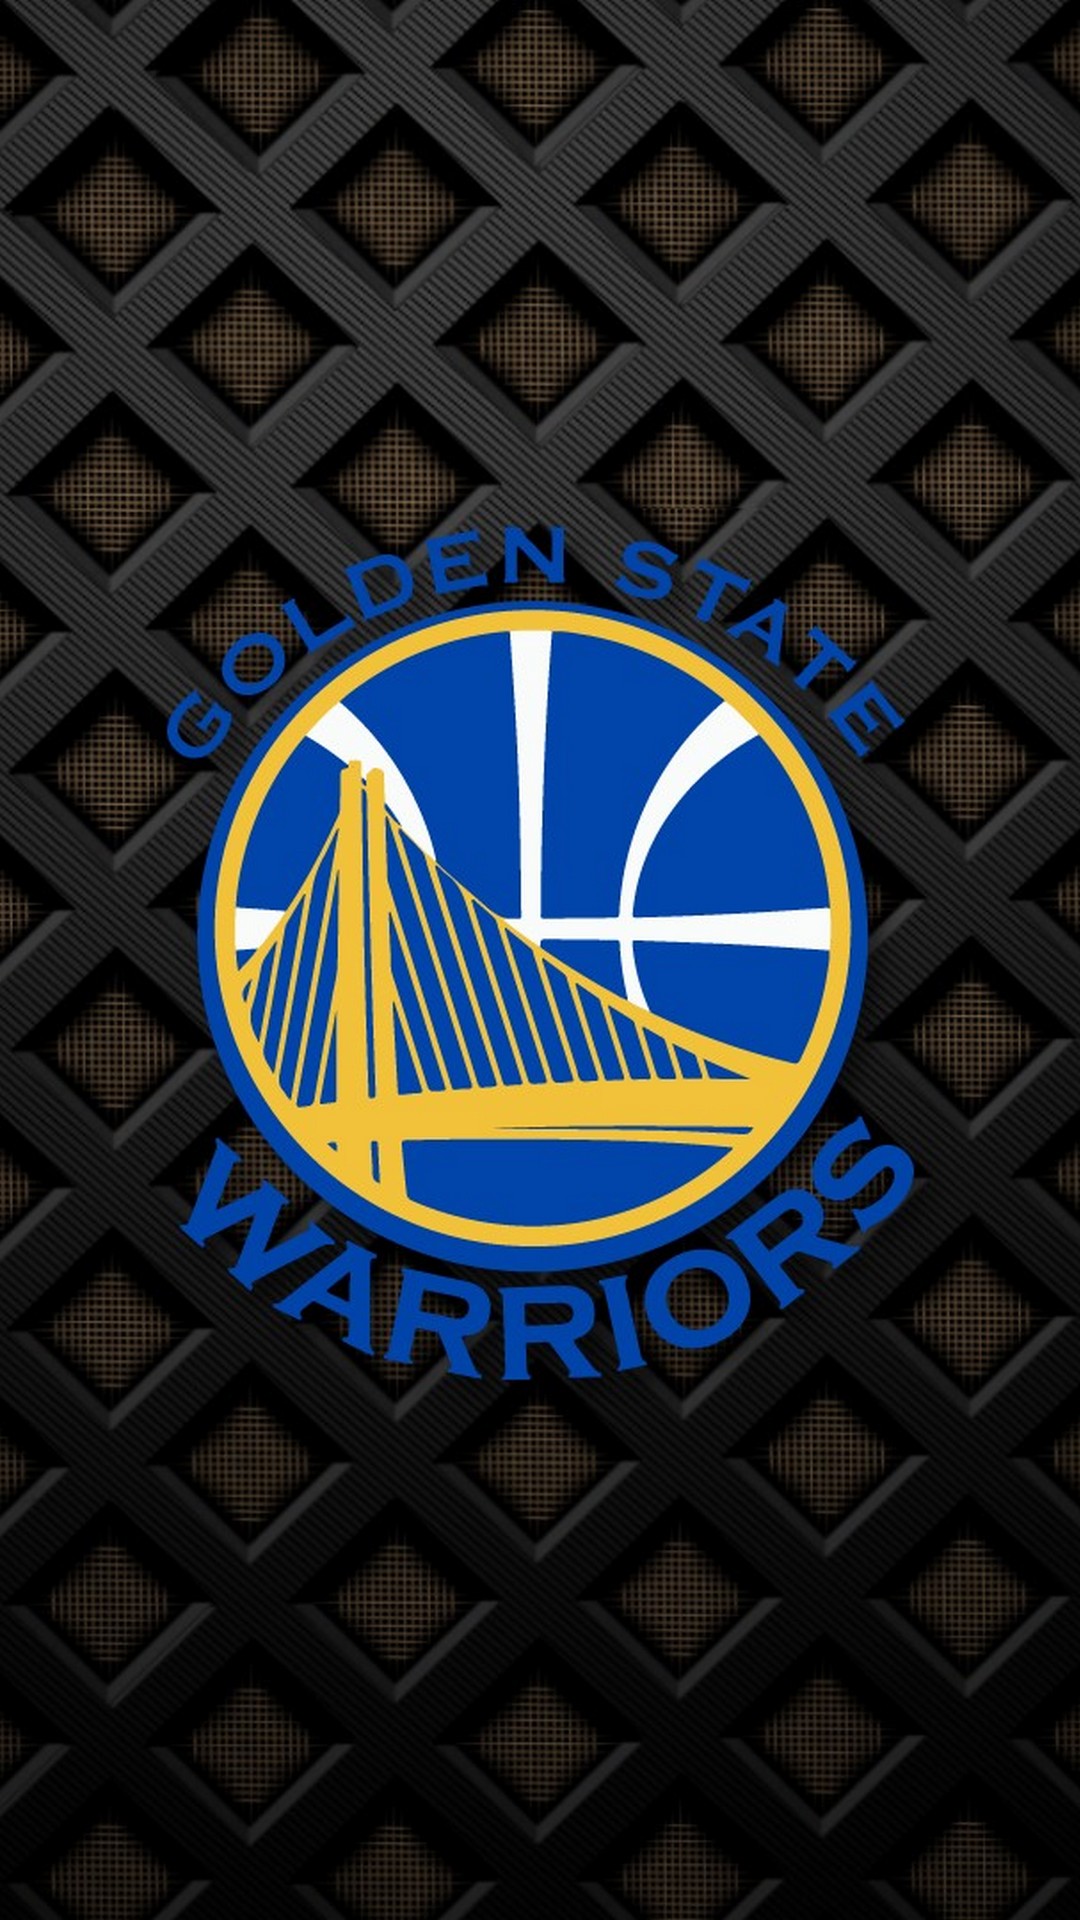 Golden State Warriors HD Wallpaper For iPhone with image dimensions 1080x1920 pixel. You can make this wallpaper for your Desktop Computer Backgrounds, Windows or Mac Screensavers, iPhone Lock screen, Tablet or Android and another Mobile Phone device